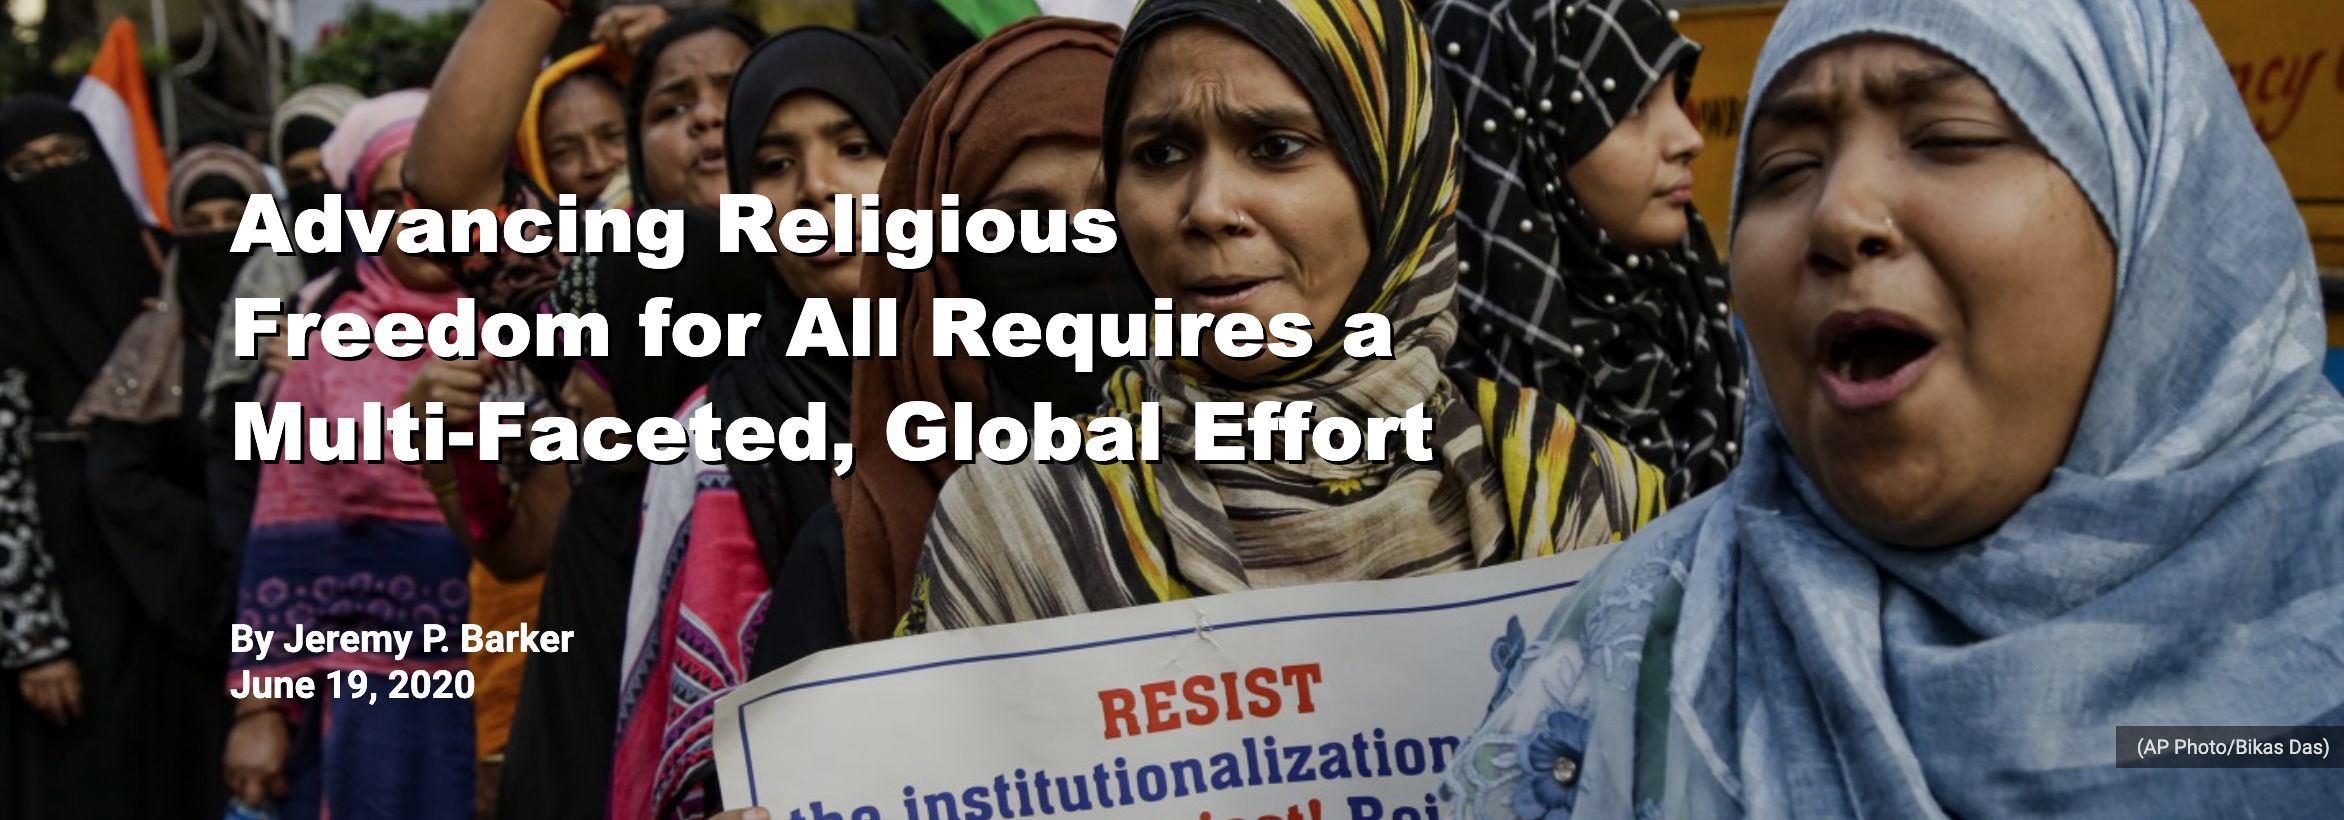 Featured image for “A Multi-Faceted, Global Effort to Advance Religious Freedom For All”